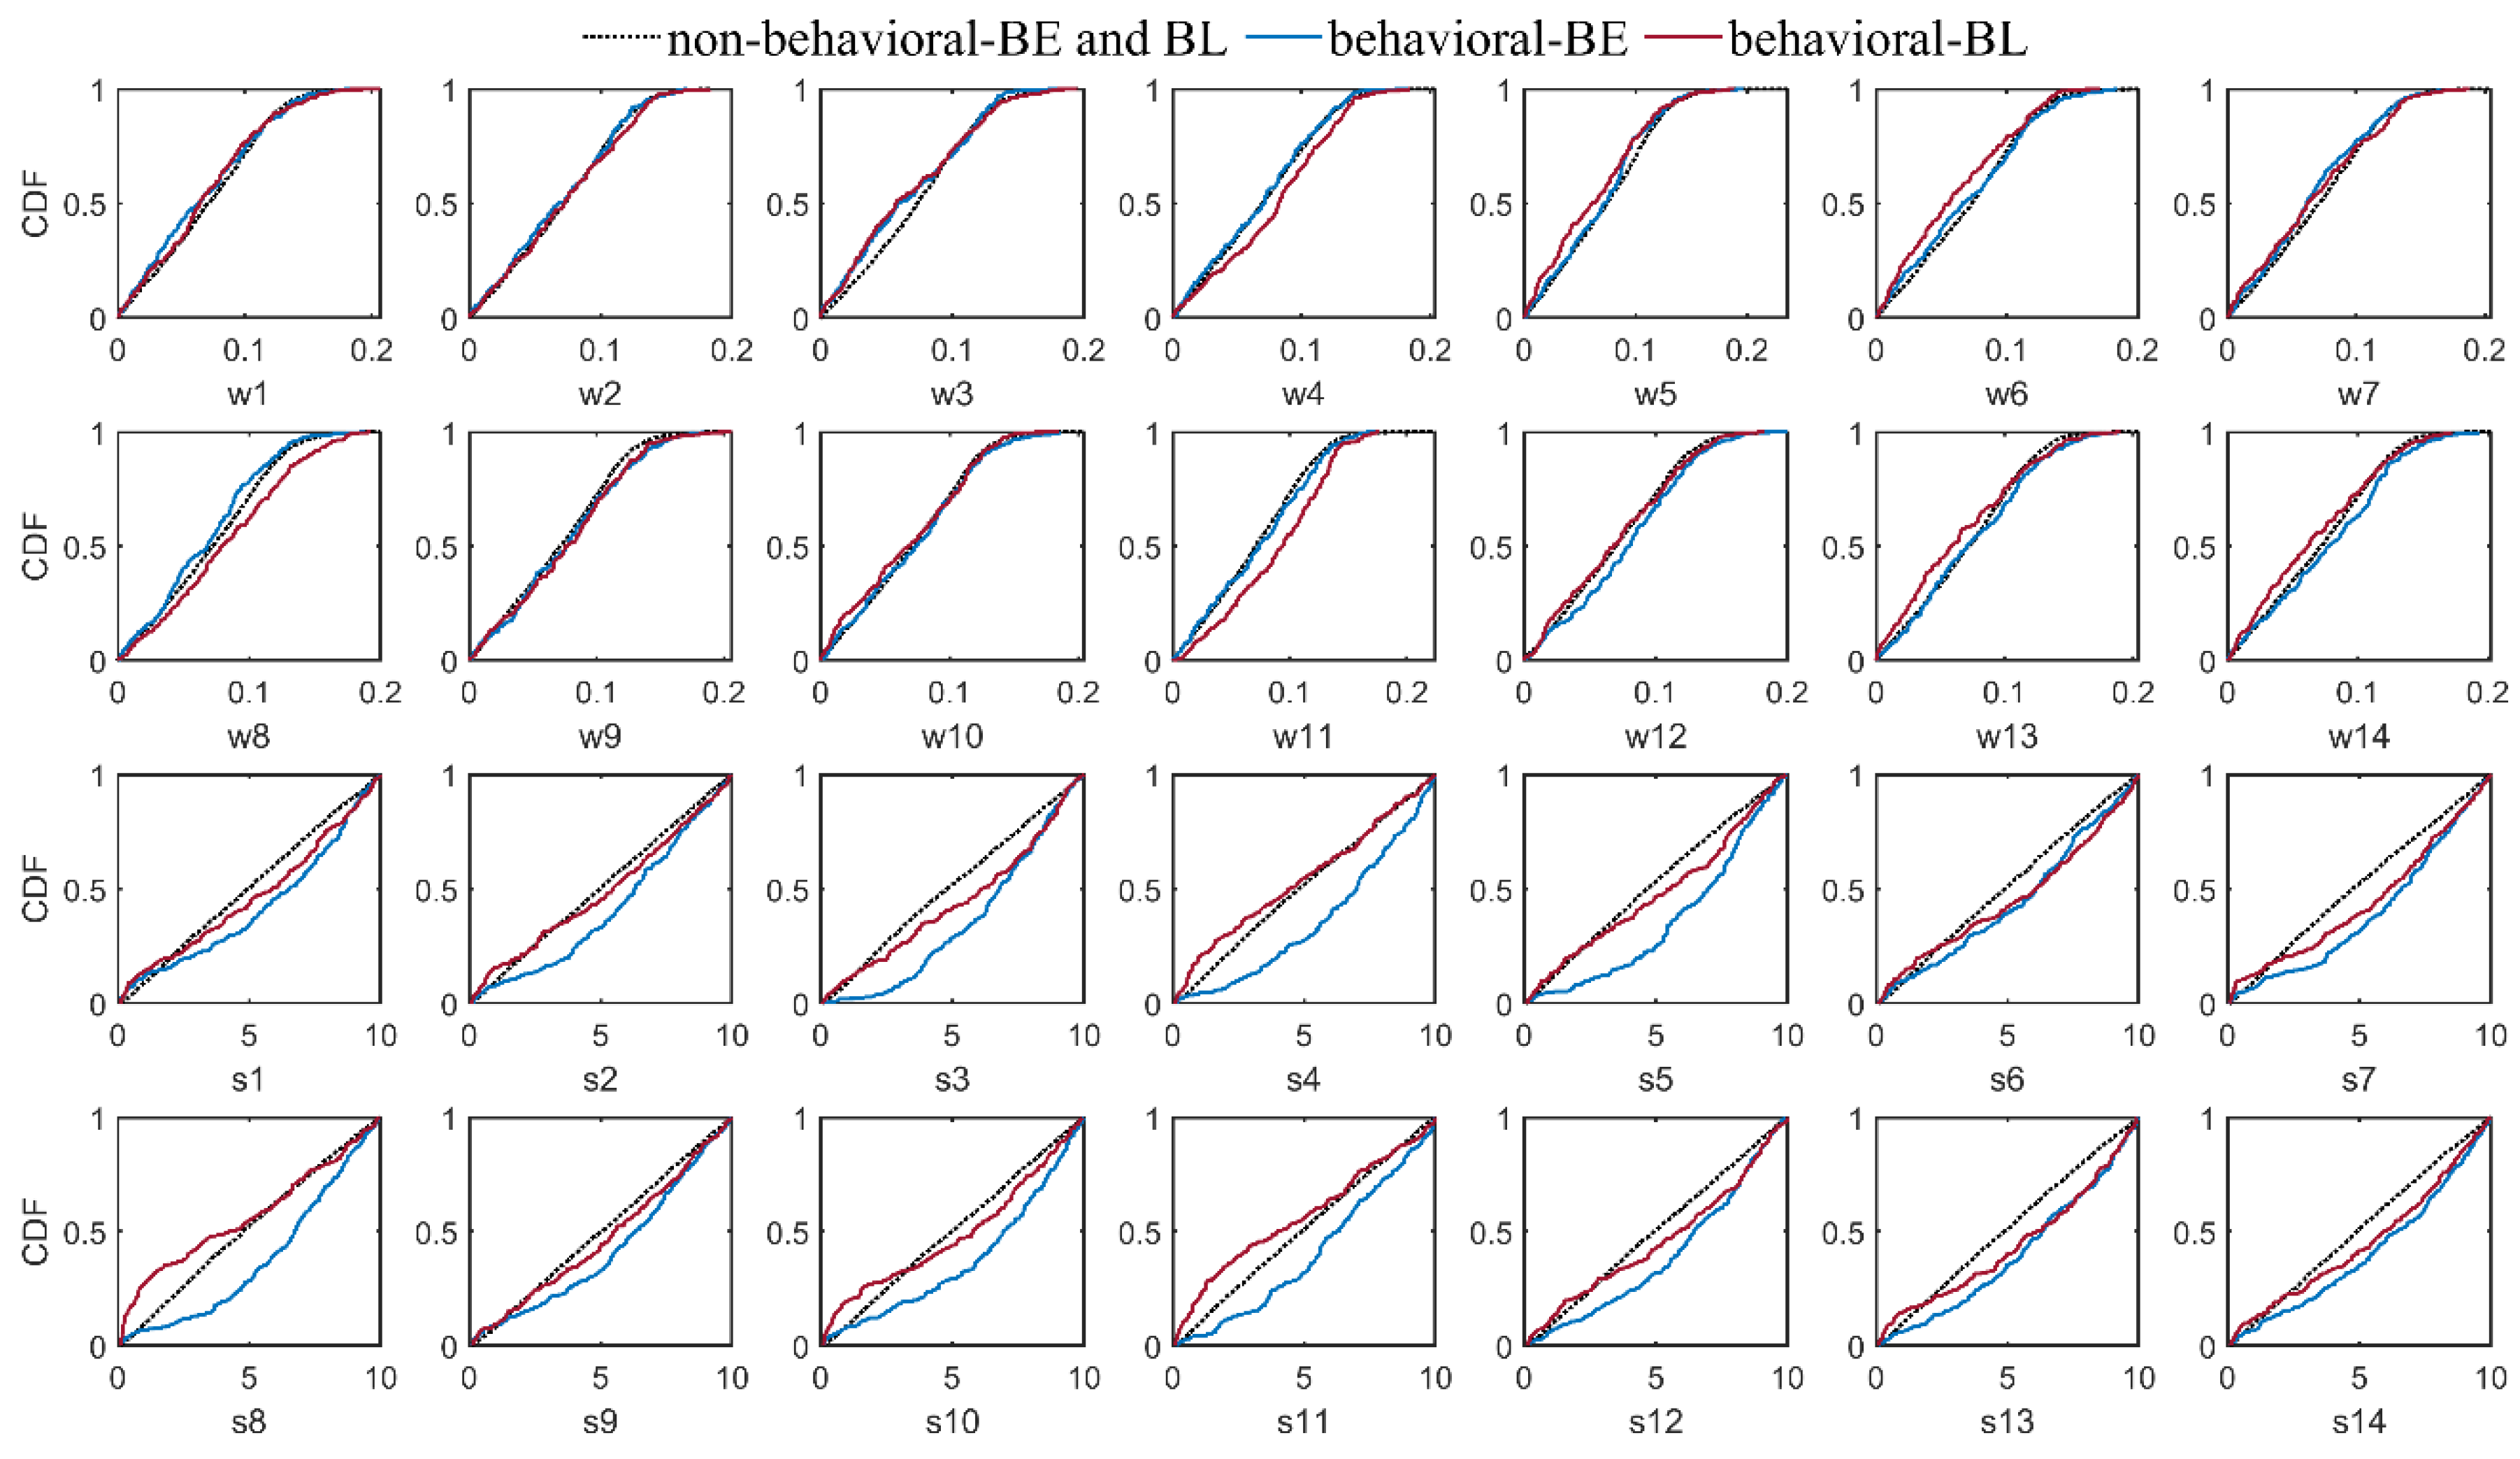 Mean verification metrics for different BMA models of 24-h